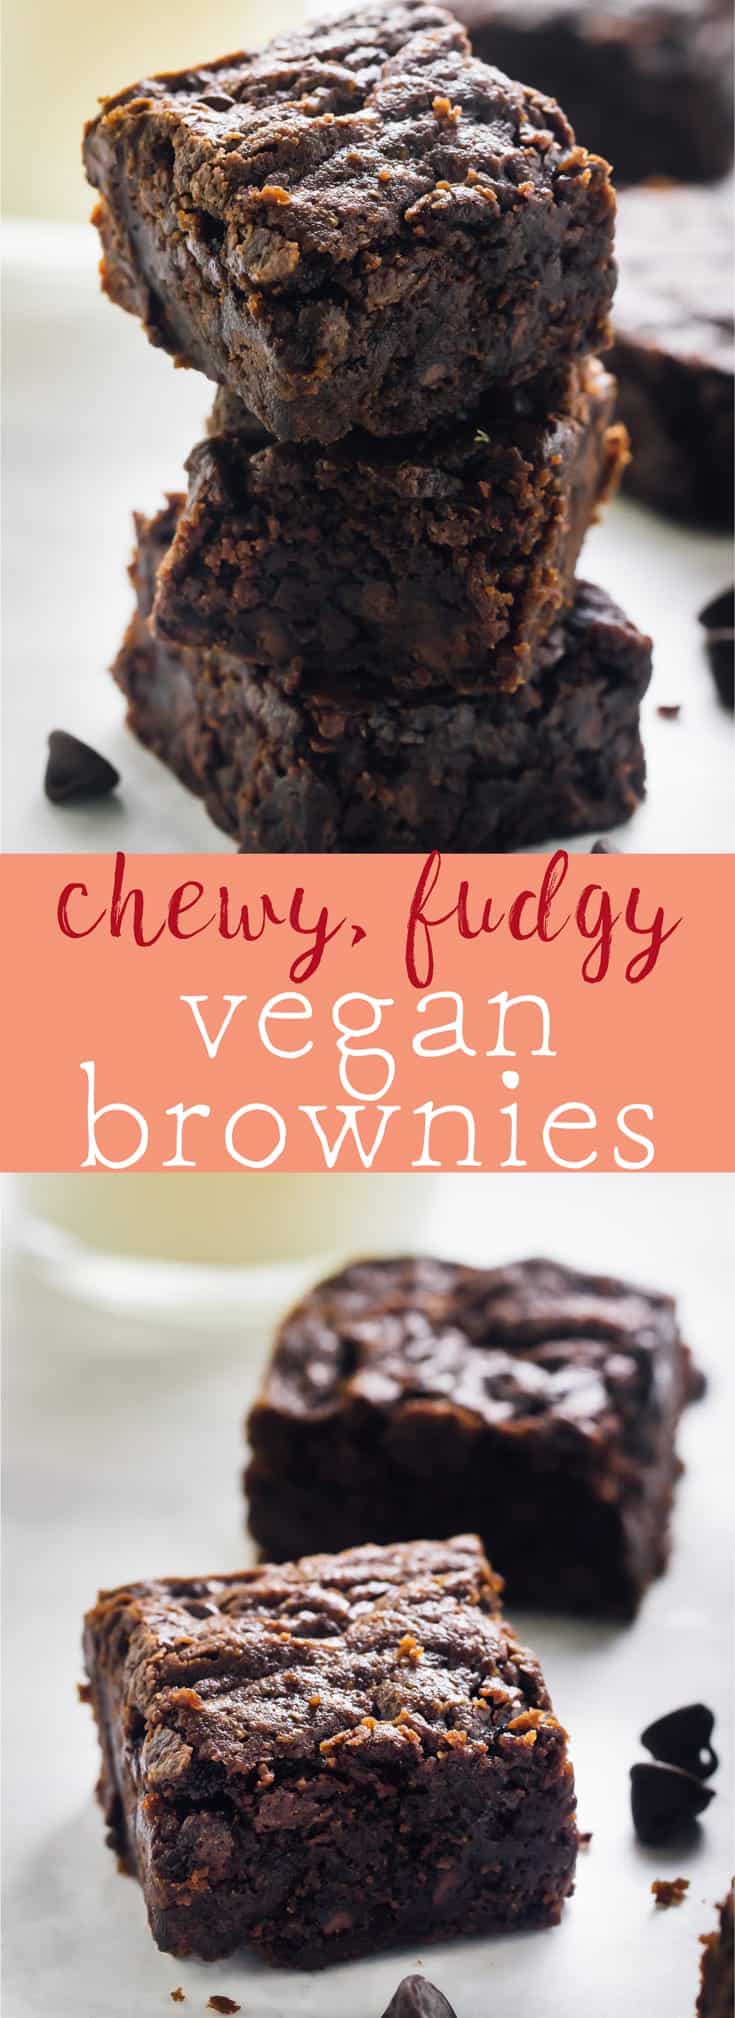 These Vegan Chocolate Chewy Fudgy Brownies are beyond addictive! They are chewy, fudgy, rich in chocolate and so easy to make! via https://jessicainthekitchen.com